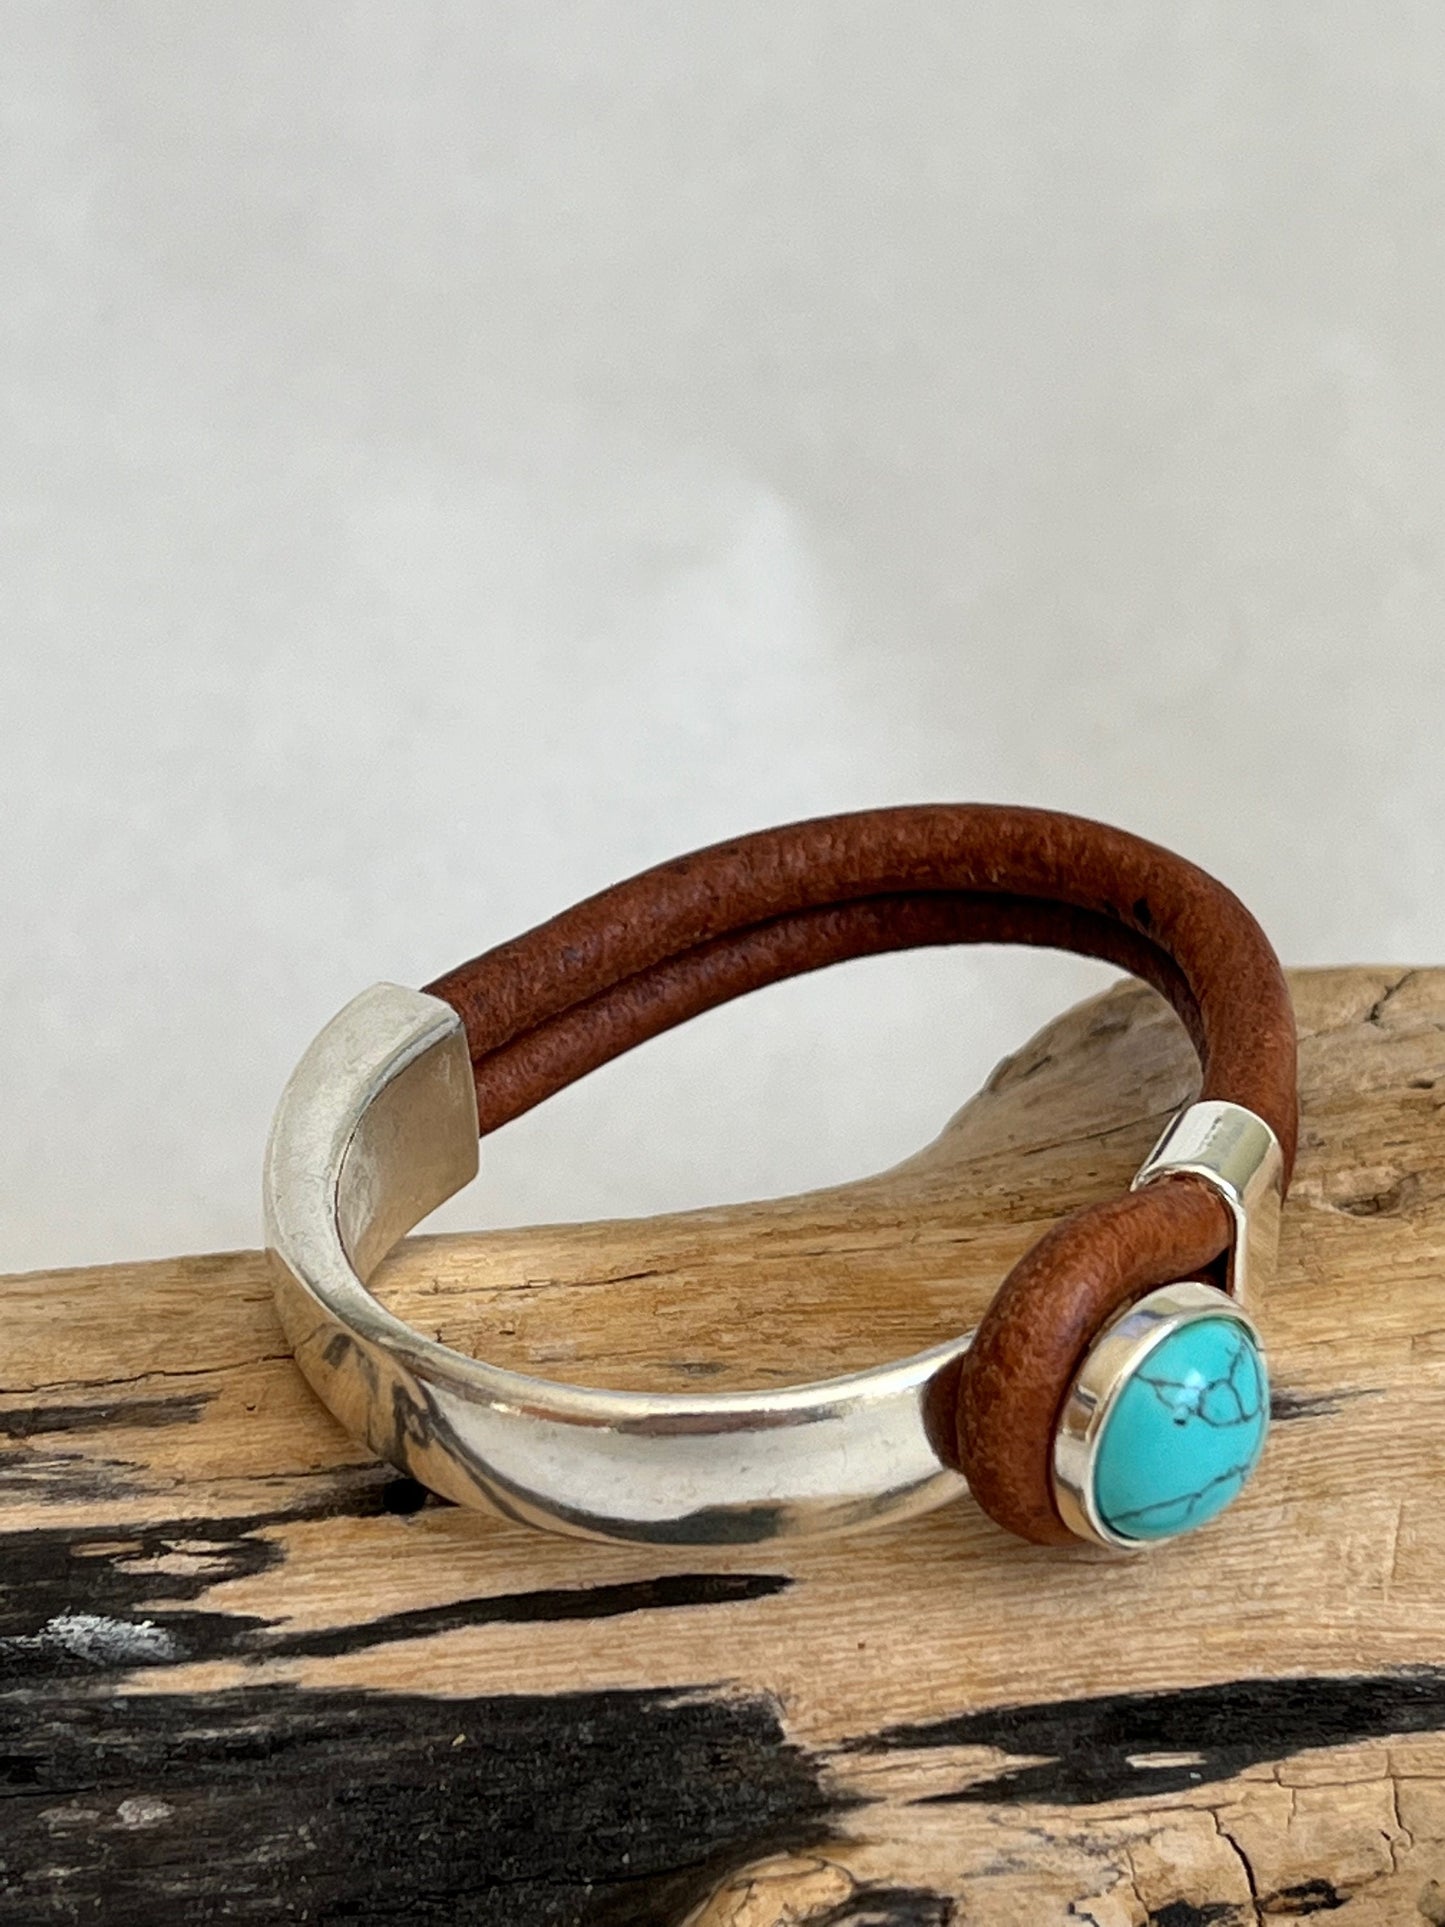 Italian rich distressed brown leather bracelet with a turquoise button clasp. Half cuff style.  Gorgeous turquoise stone, soft leather and trendy clasp.